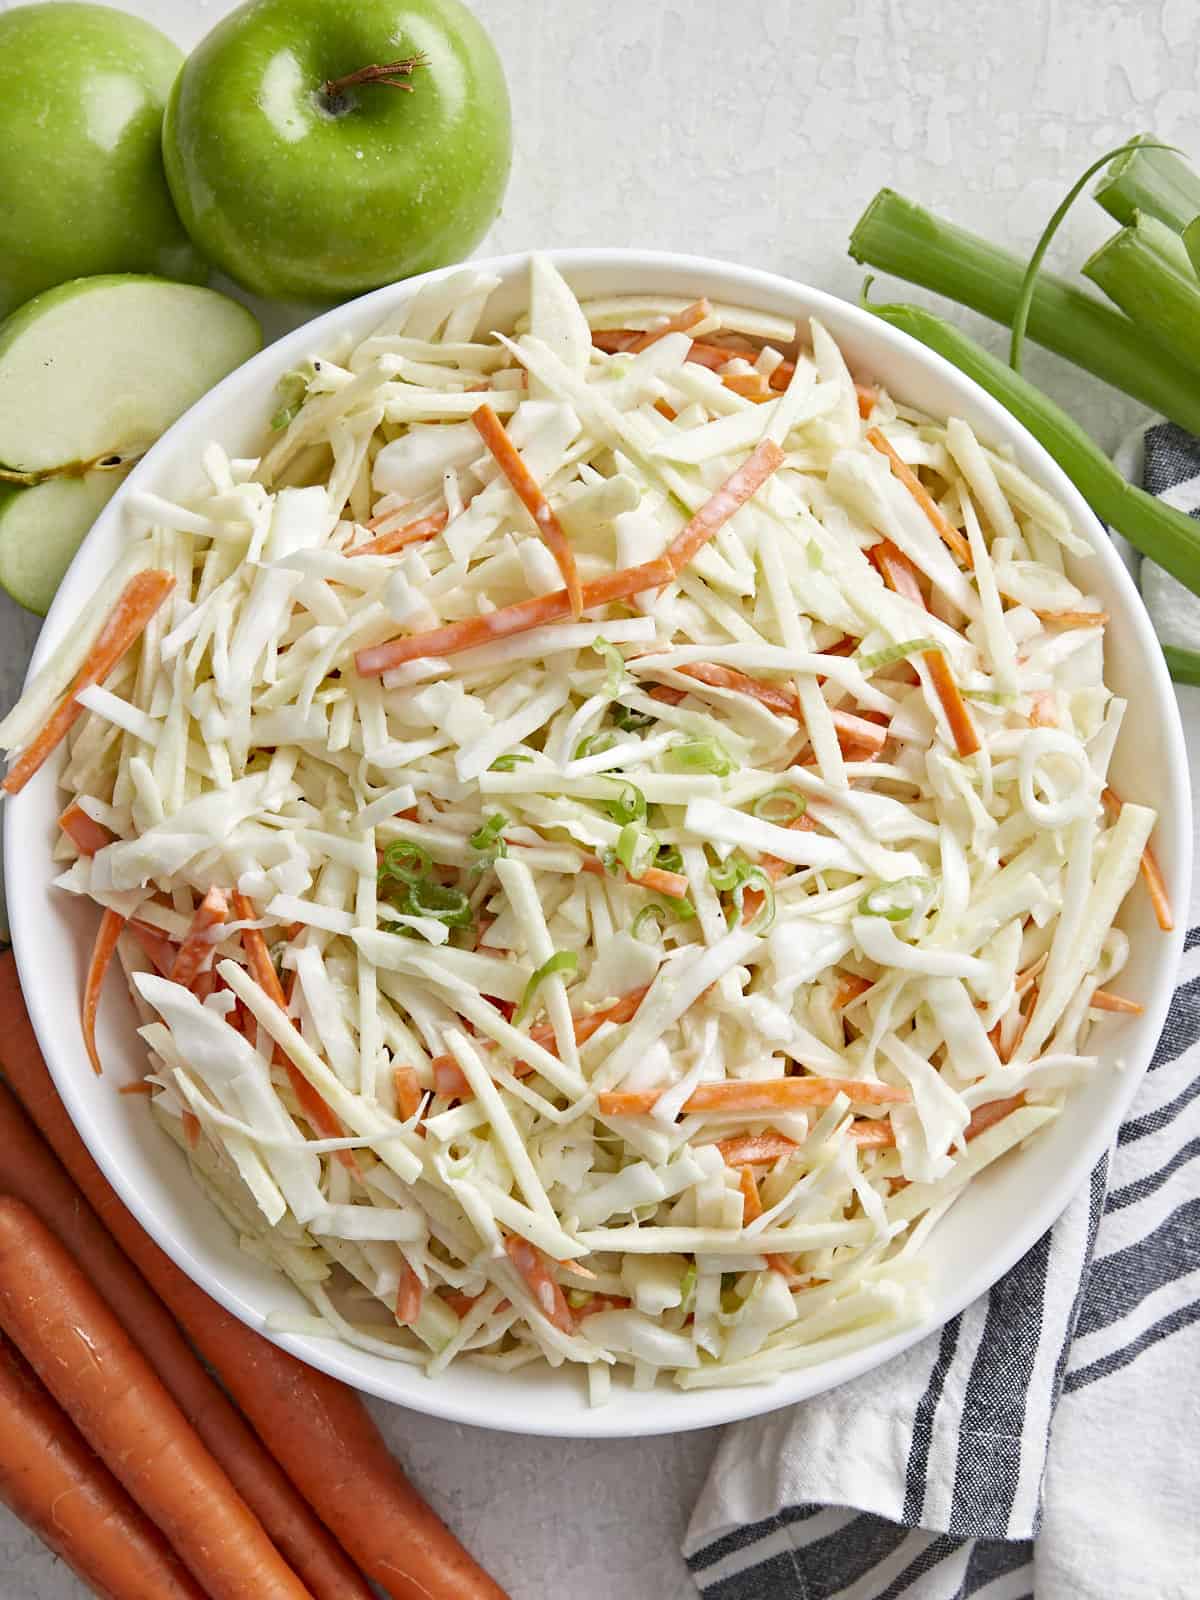 Overhead view of a bowl full of apple slaw with ingredients on the sides.